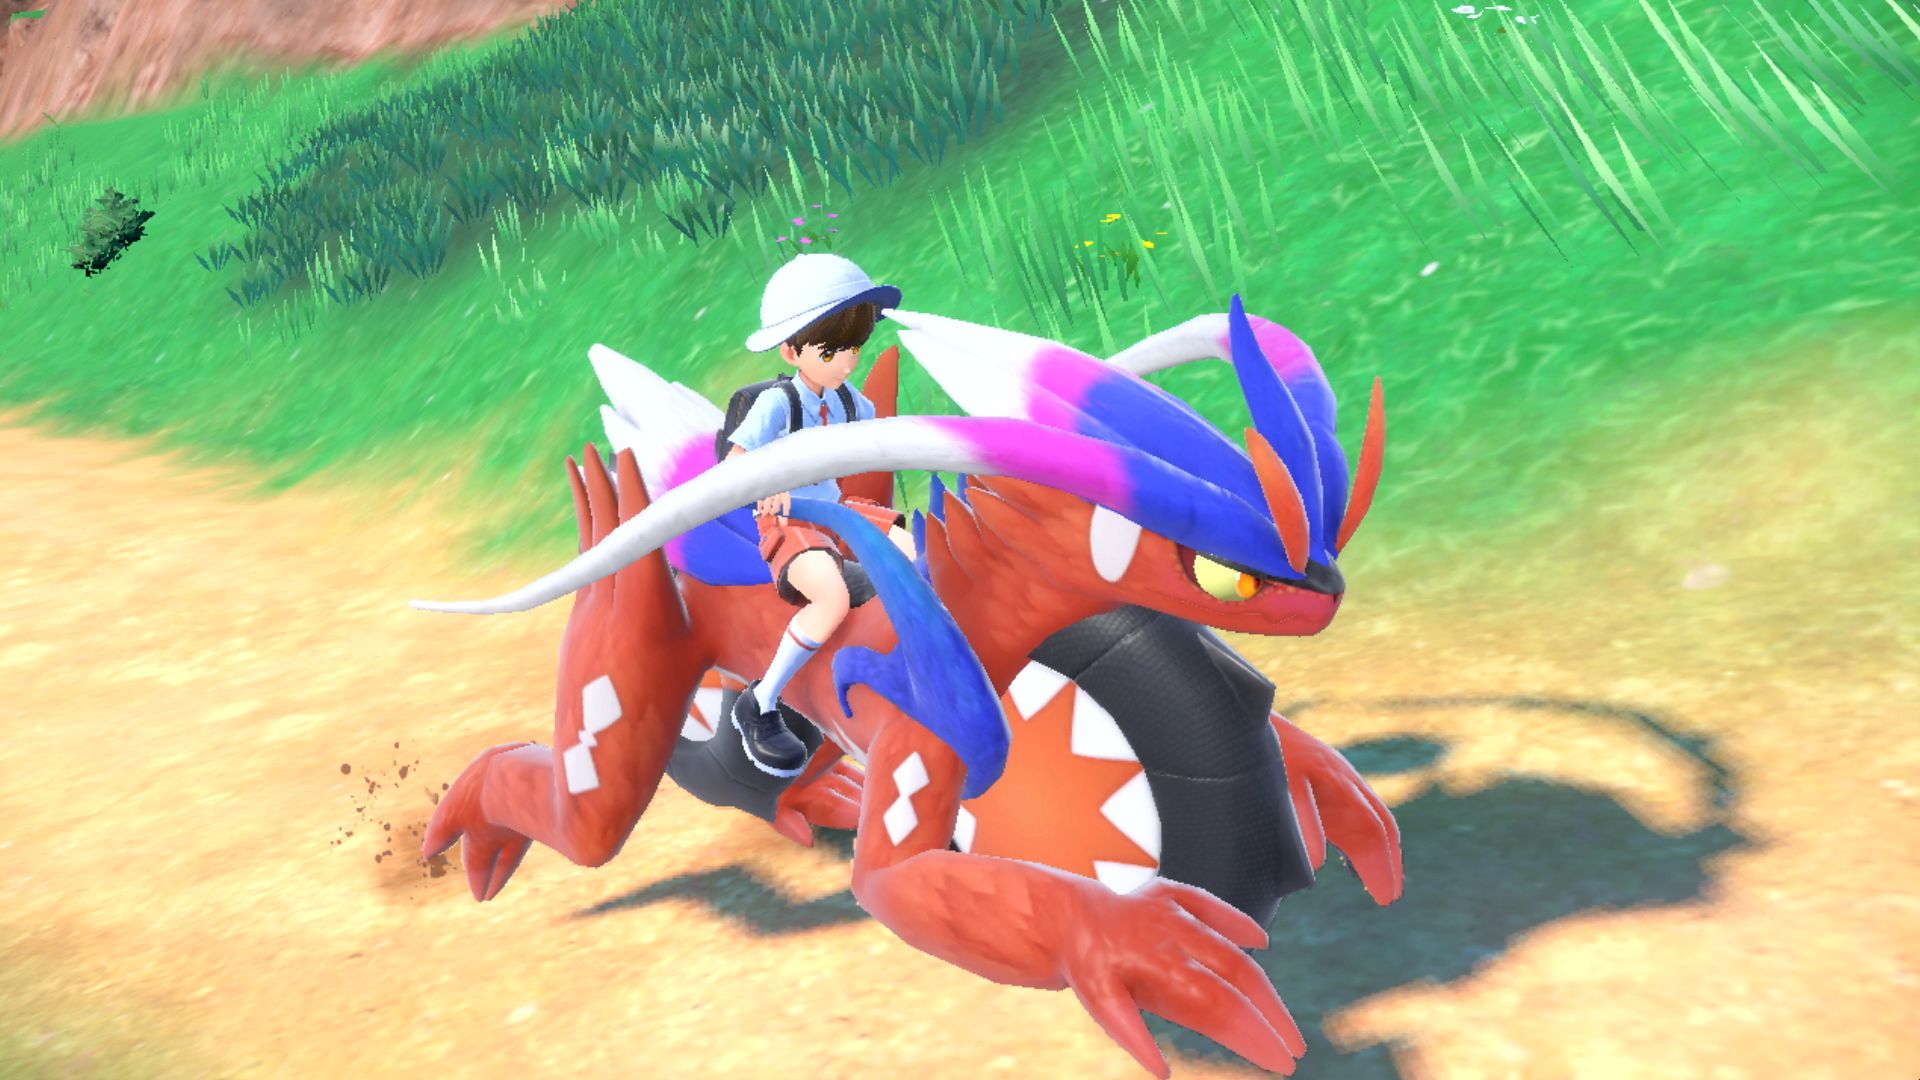 PC modders are running Pokemon Scarlet & Violet at 60fps - Video